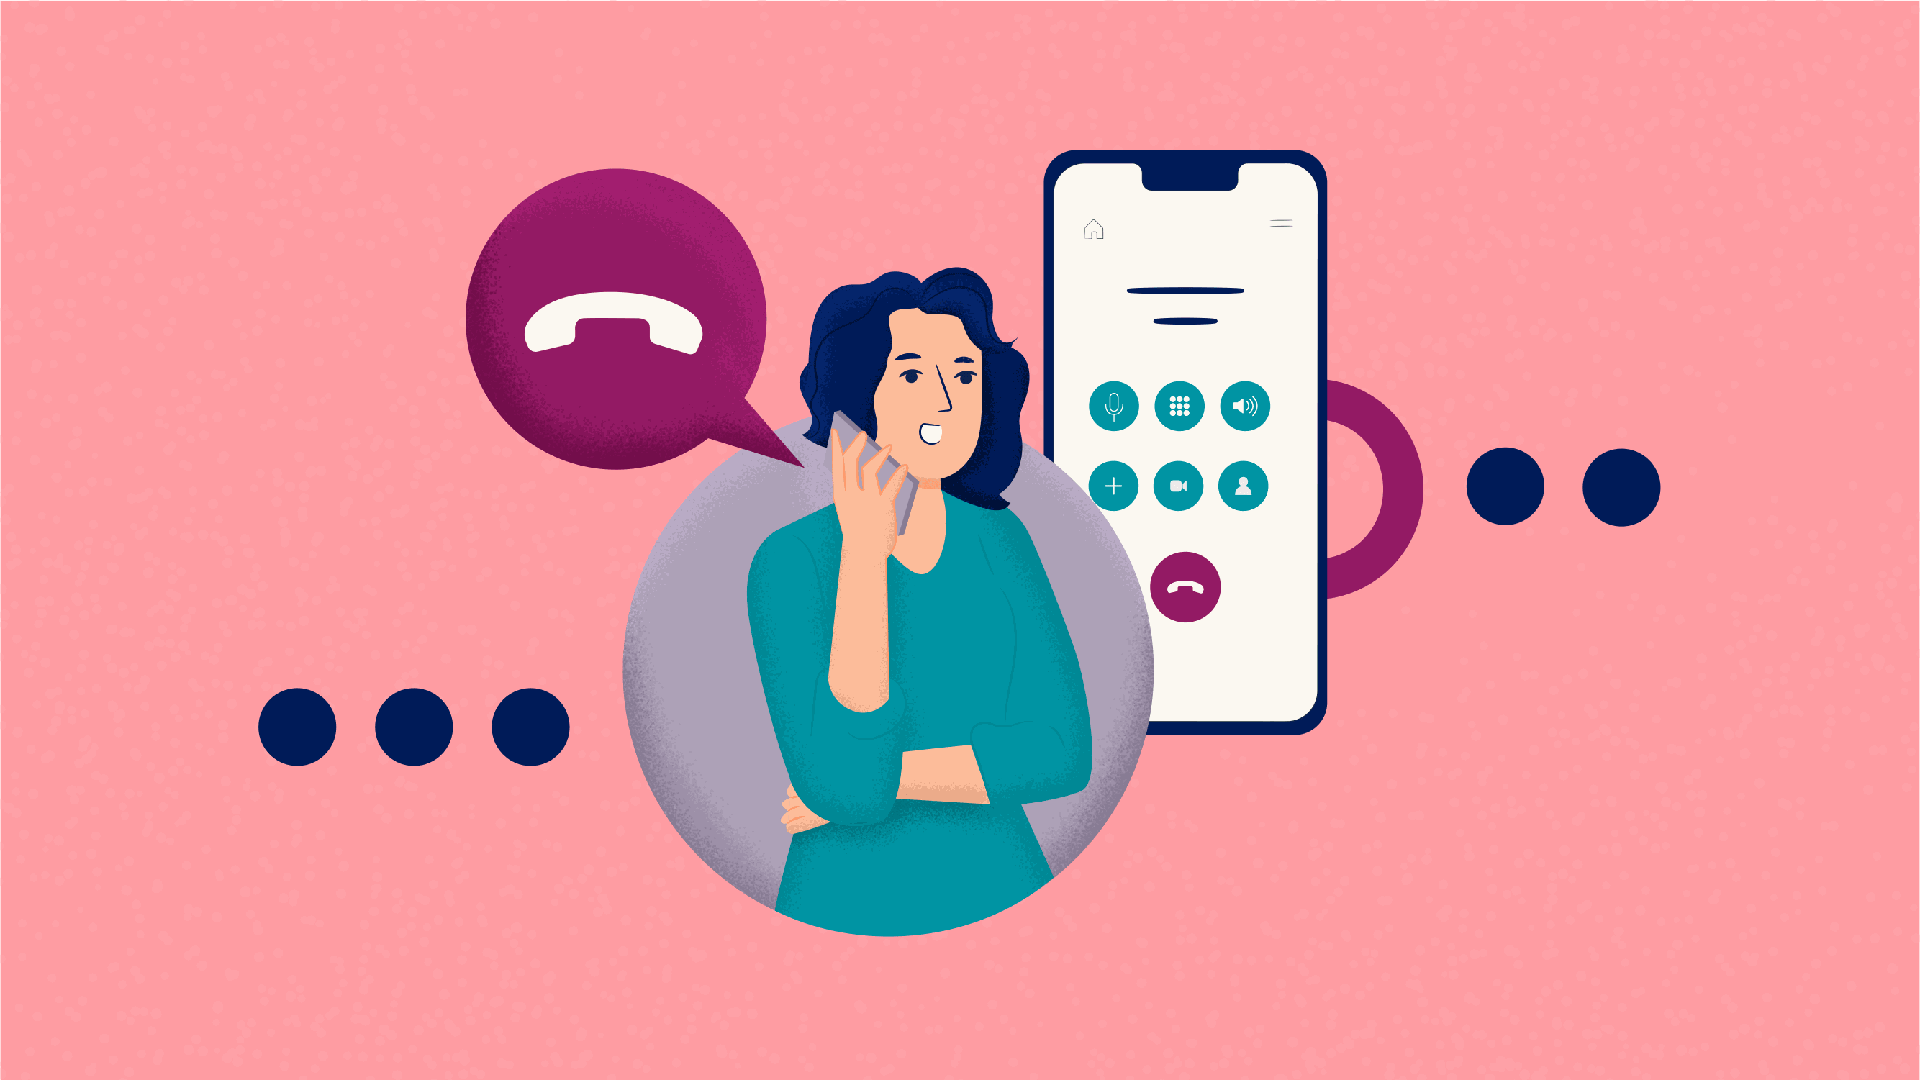 How to end a conversation: Illustration of person on the phone